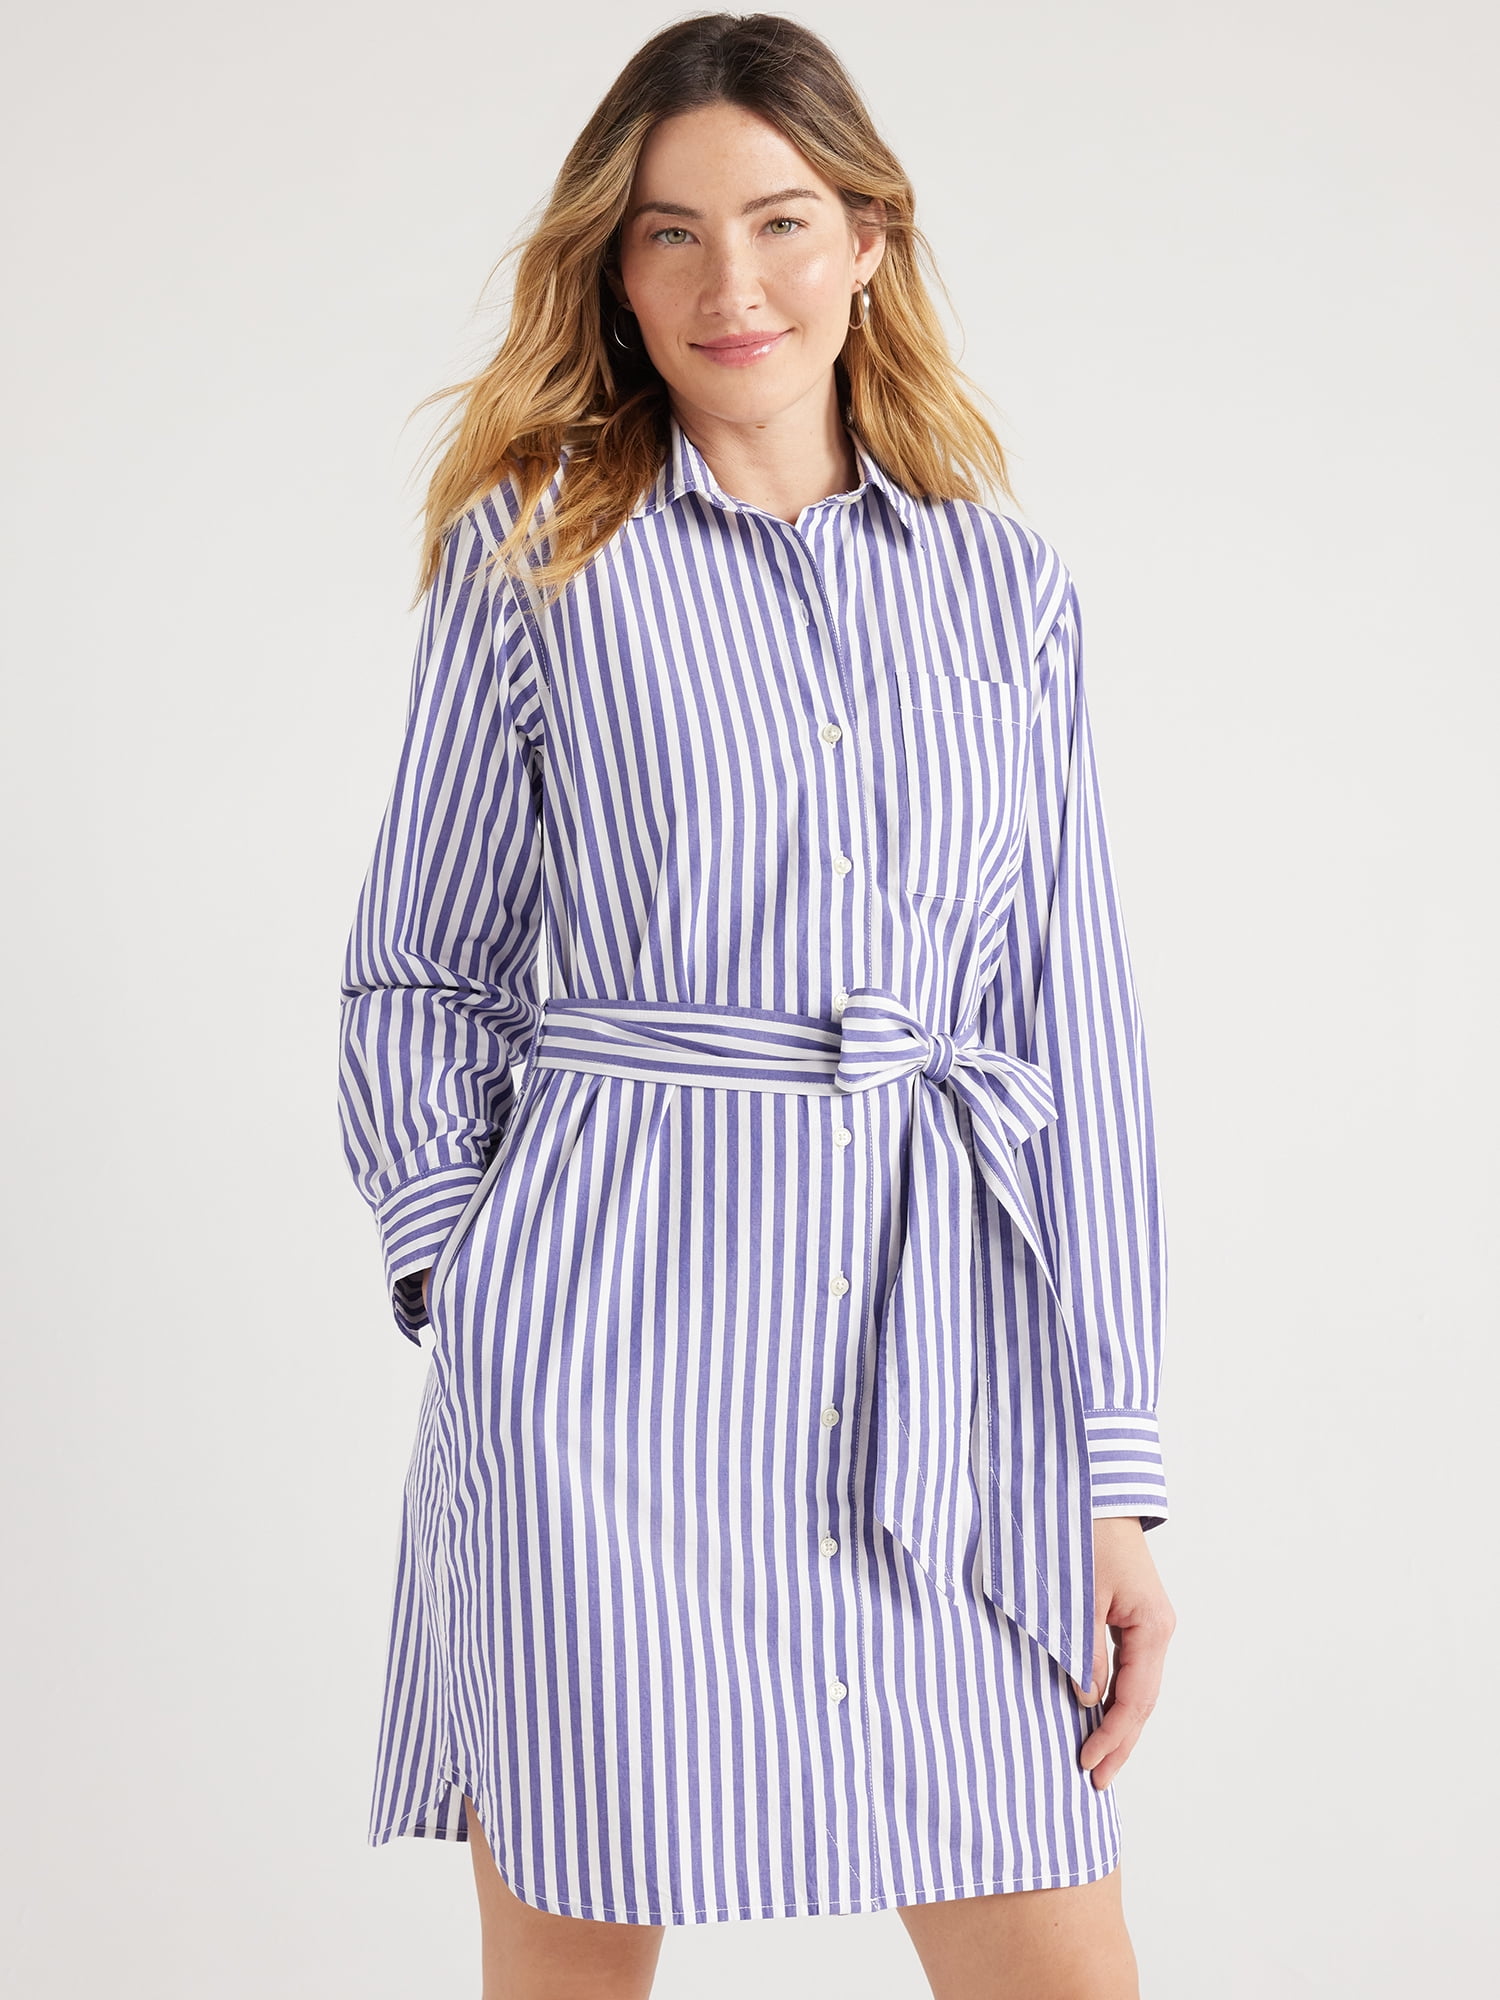 Free Assembly Women’s Cotton Belted Shirtdress with Long Sleeves, Sizes ...